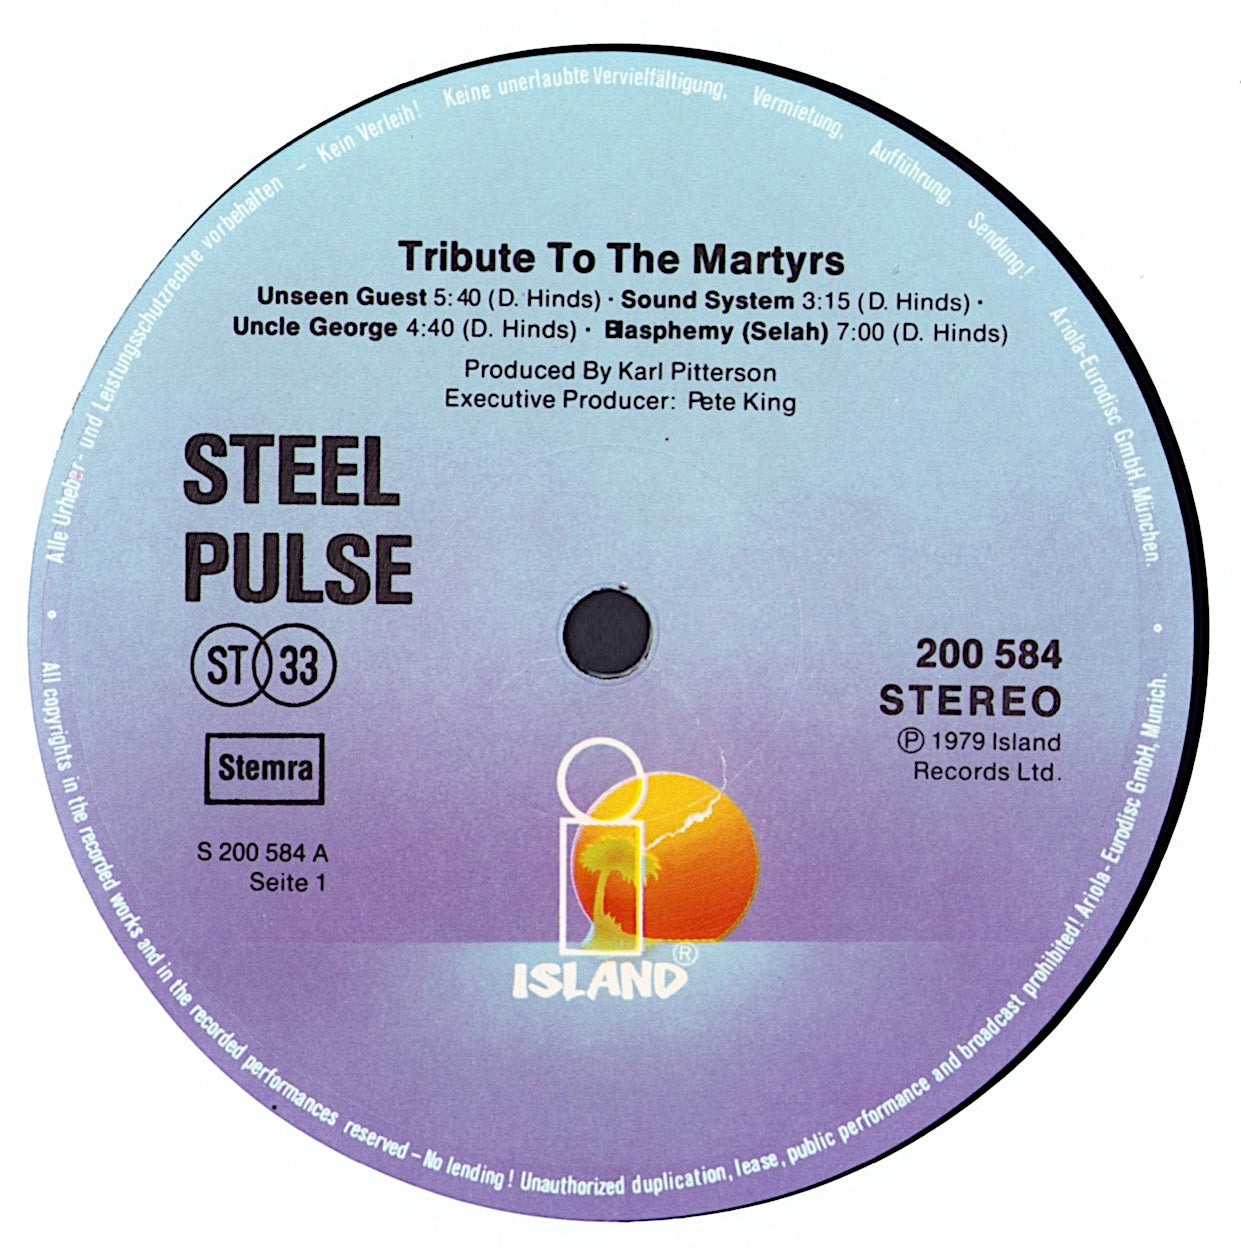 Steel Pulse - Tribute To The Martyrs Vinyl LP